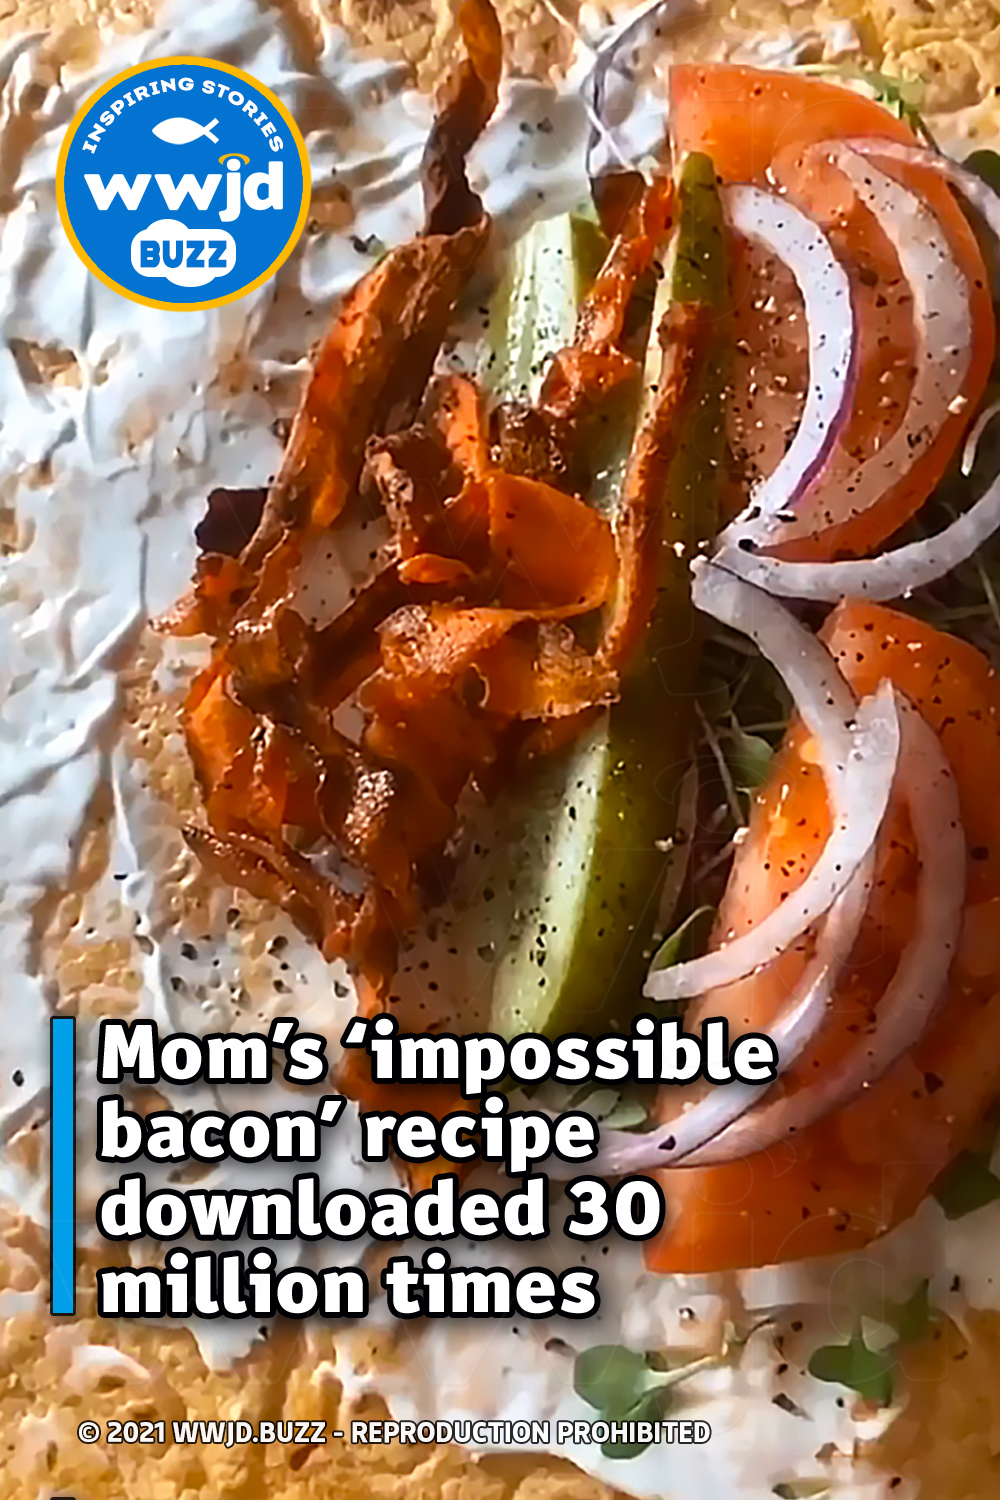 Mom’s ‘impossible bacon’ recipe downloaded 30 million times